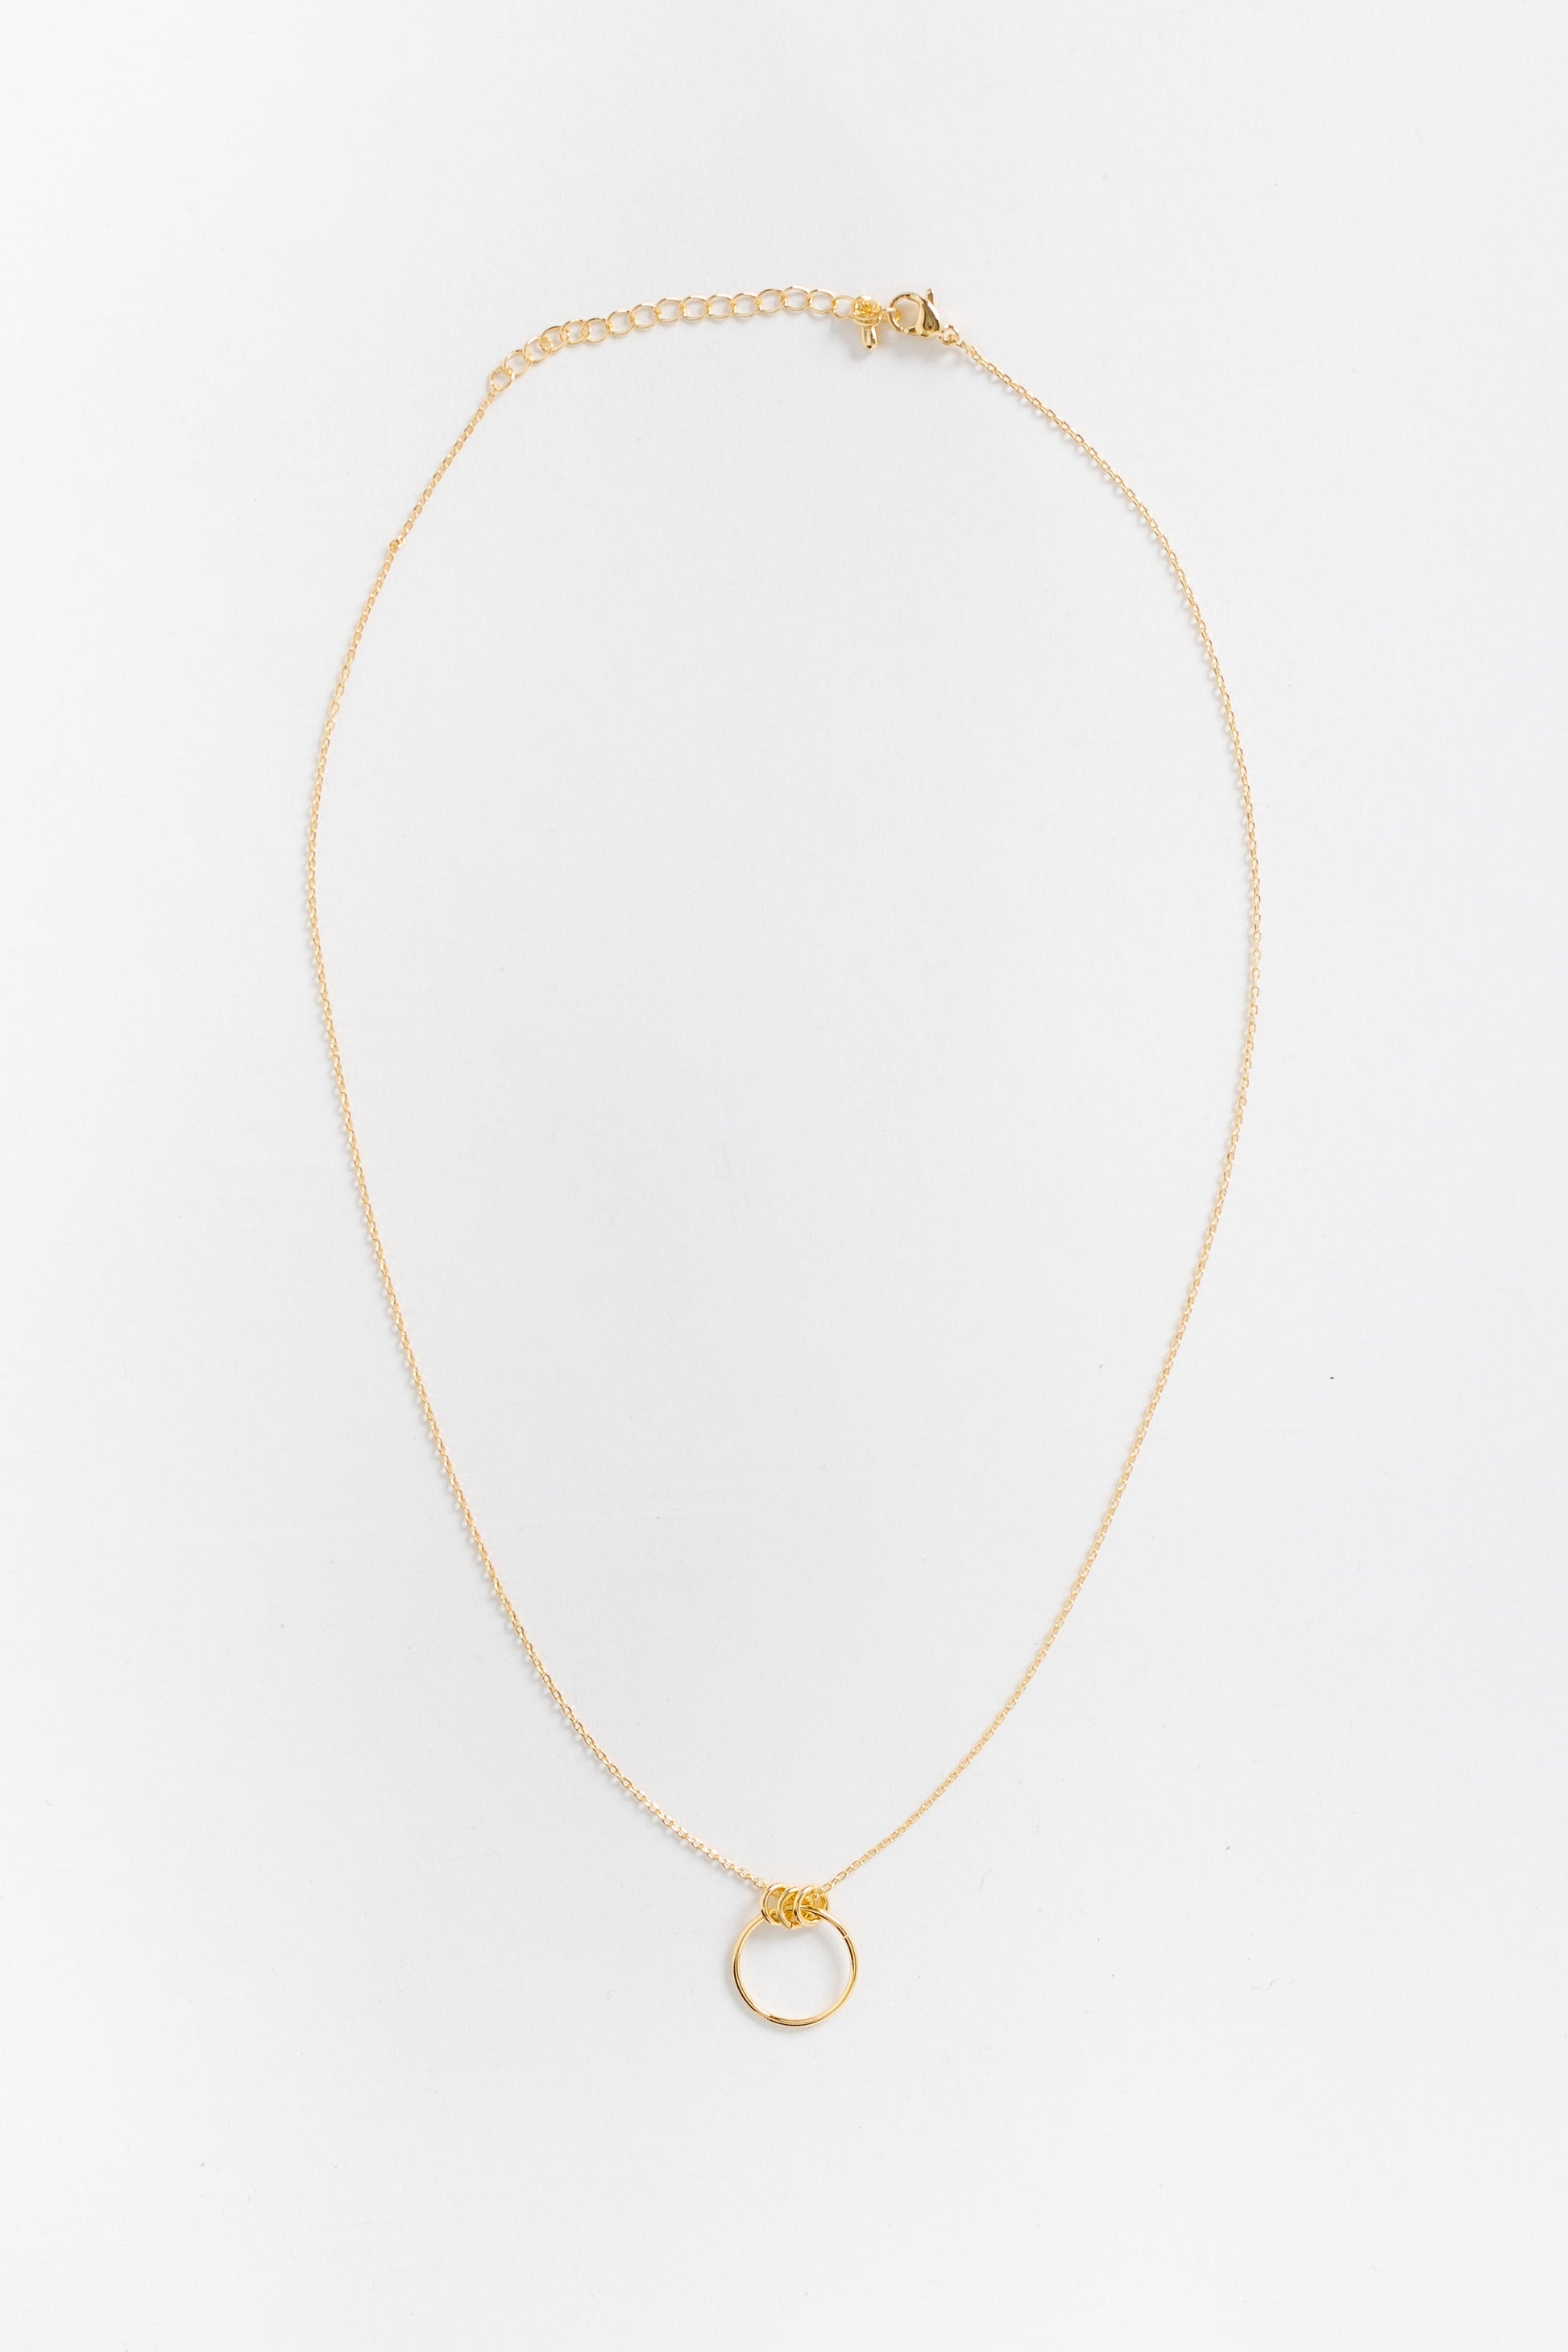 Lakeside Gold Circle Necklace WOMEN'S NECKLACE Cove 